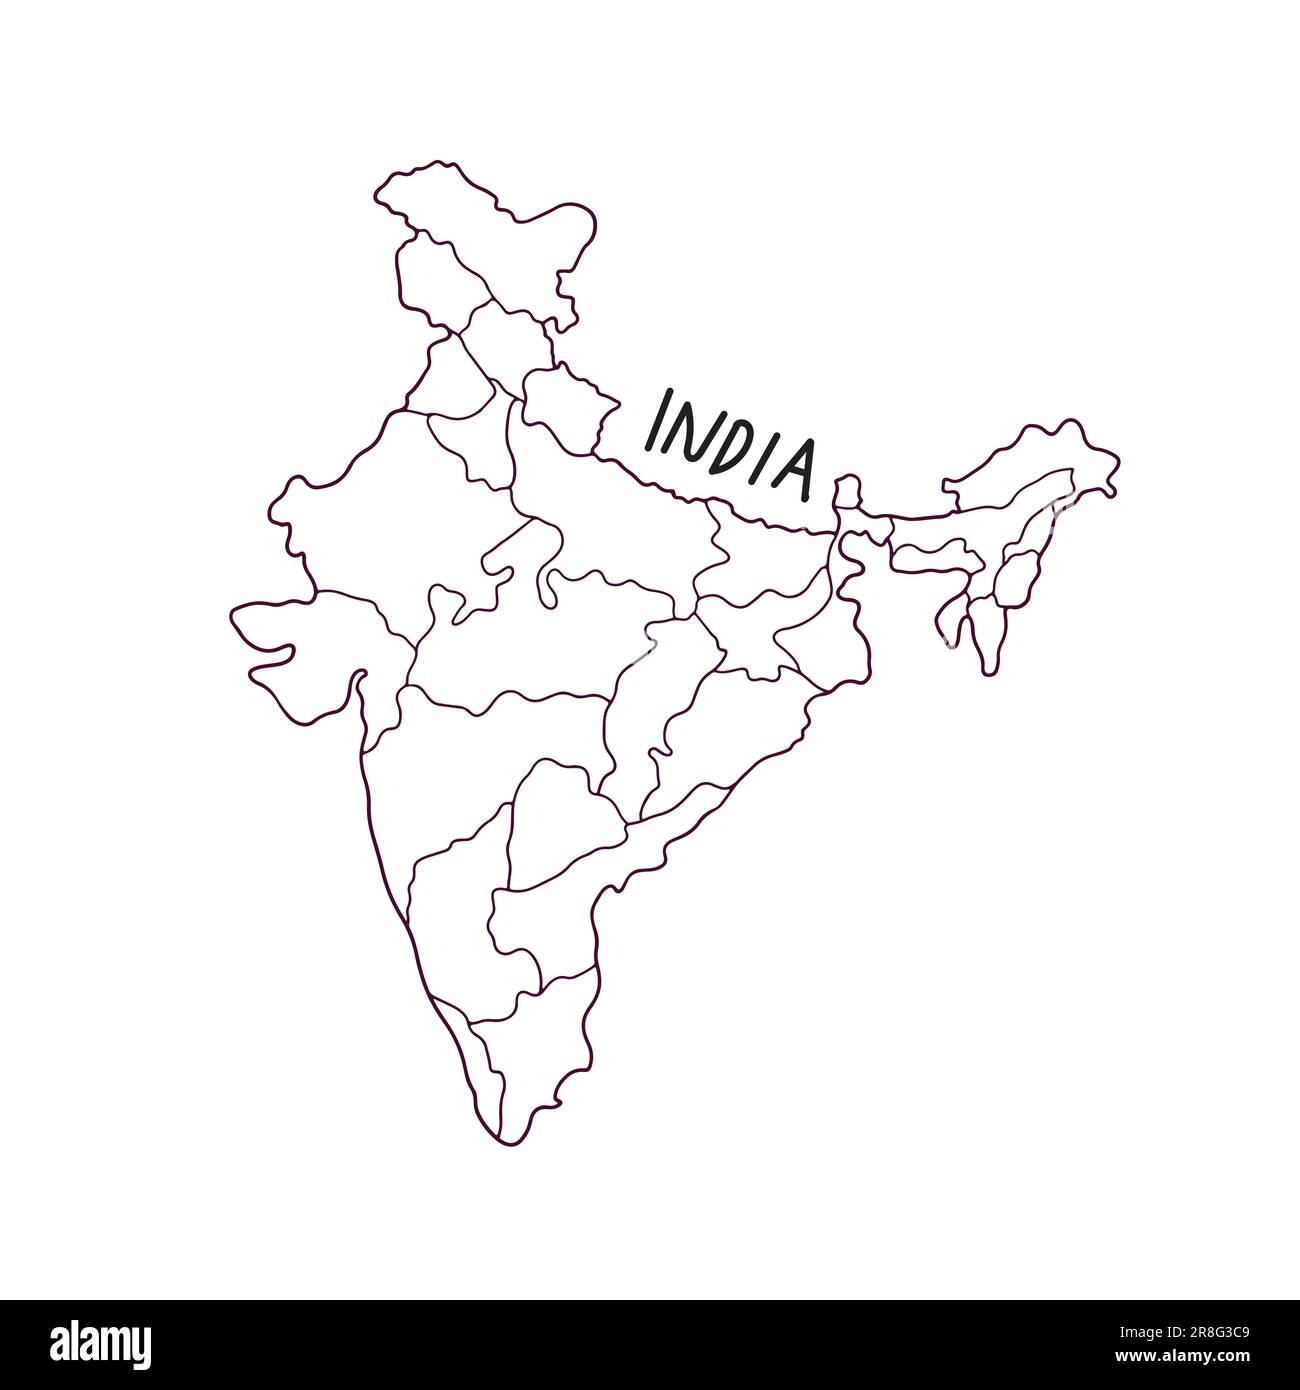 hand drawn doodle map of India Stock Vector